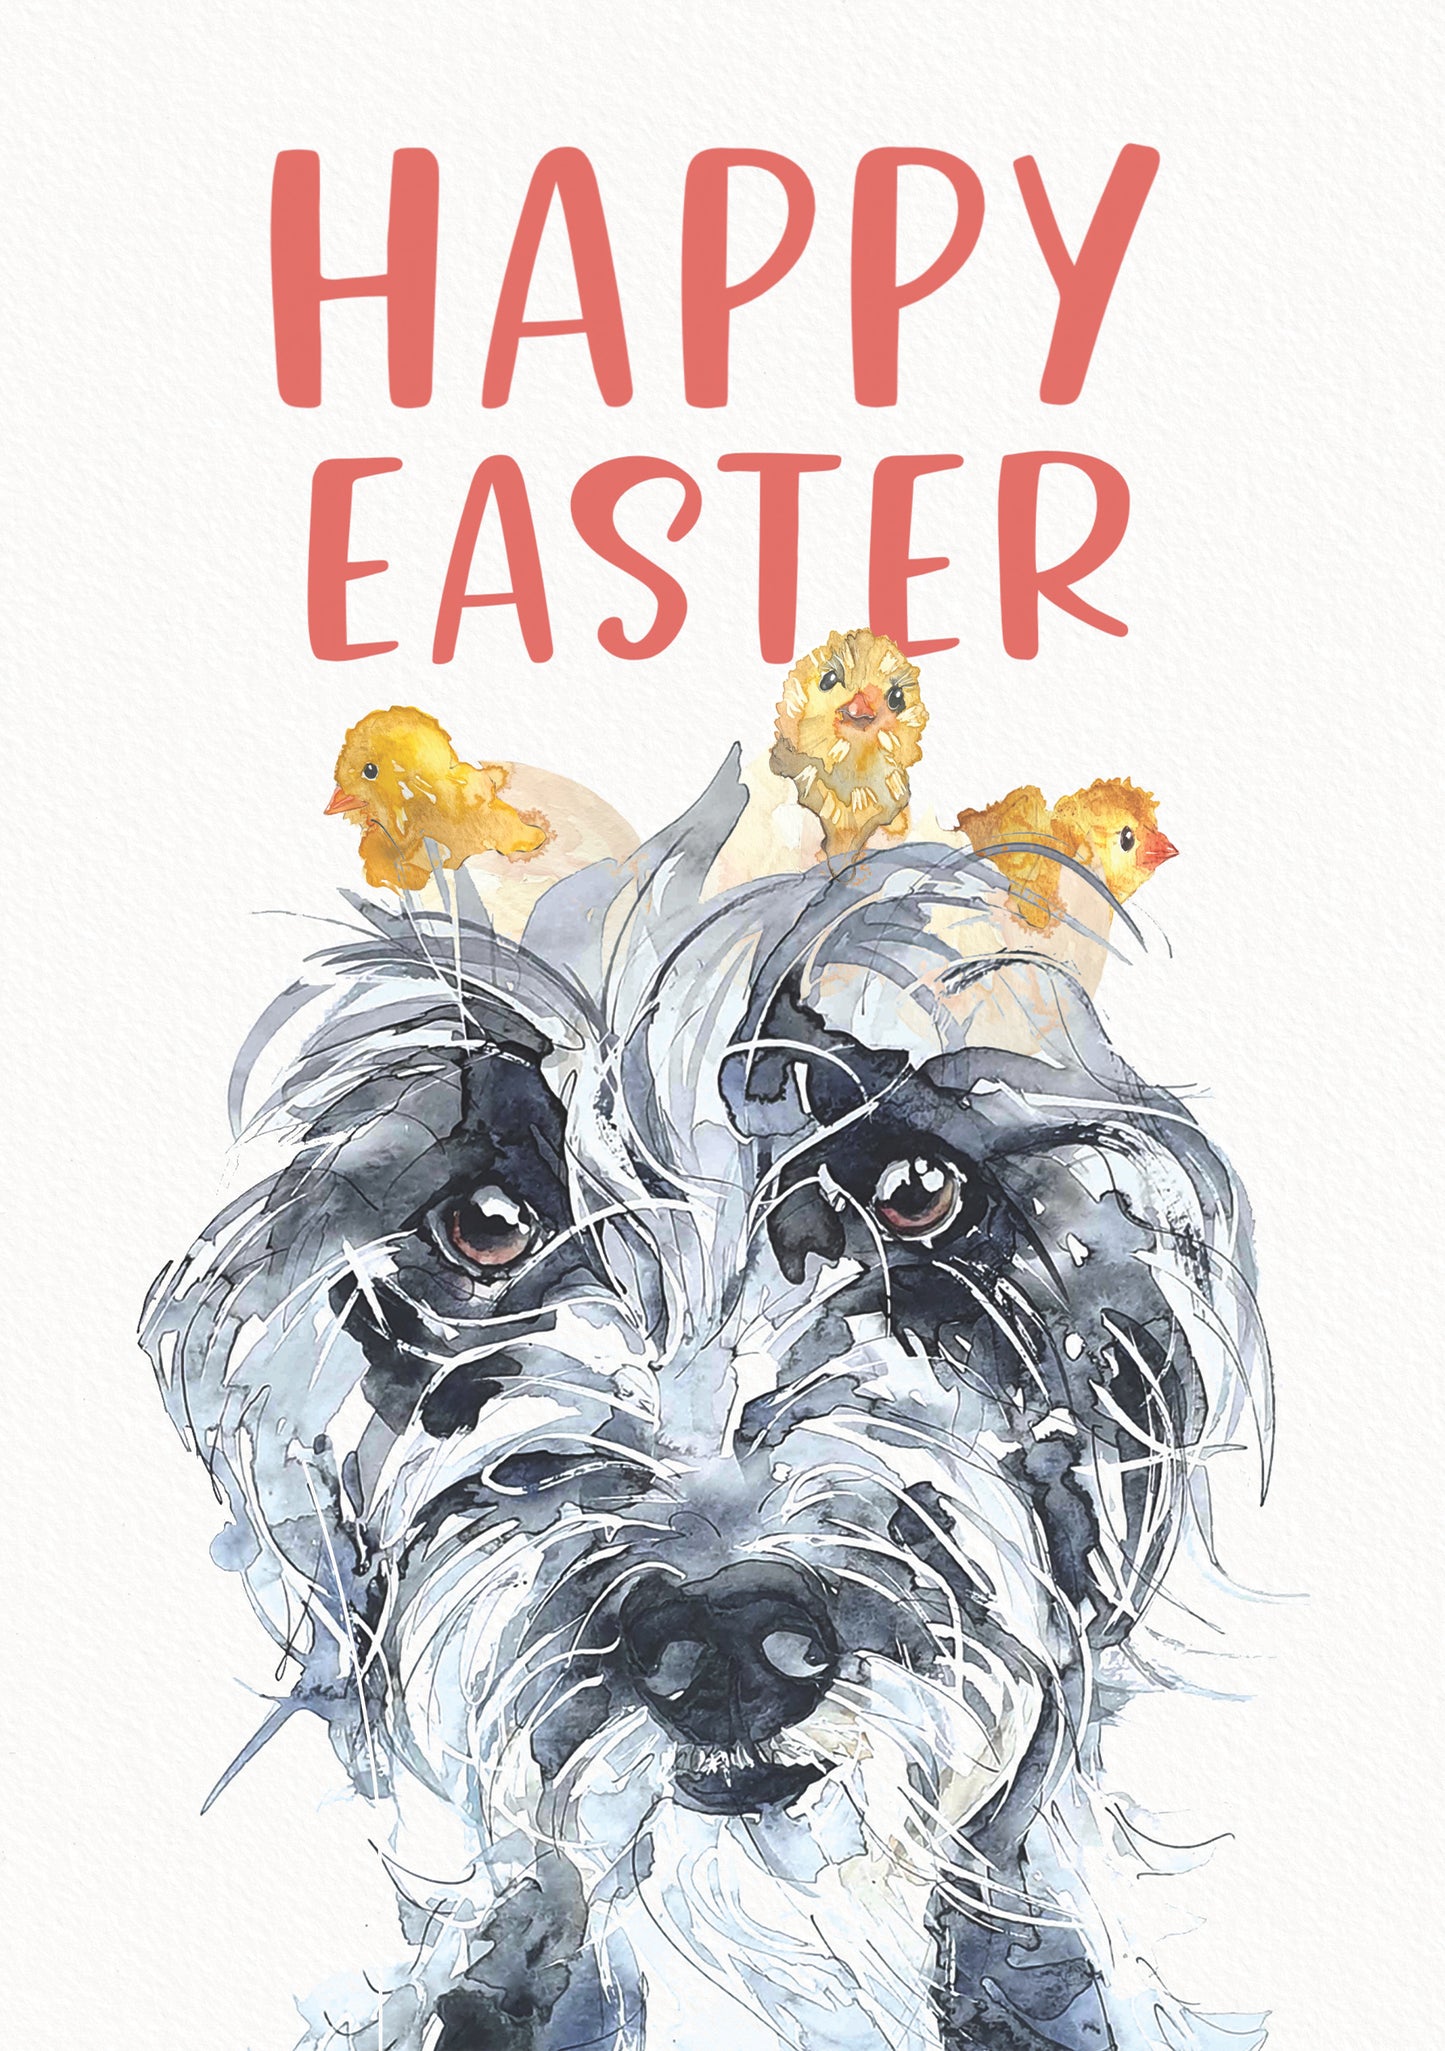 Designing a greeting card for Easter